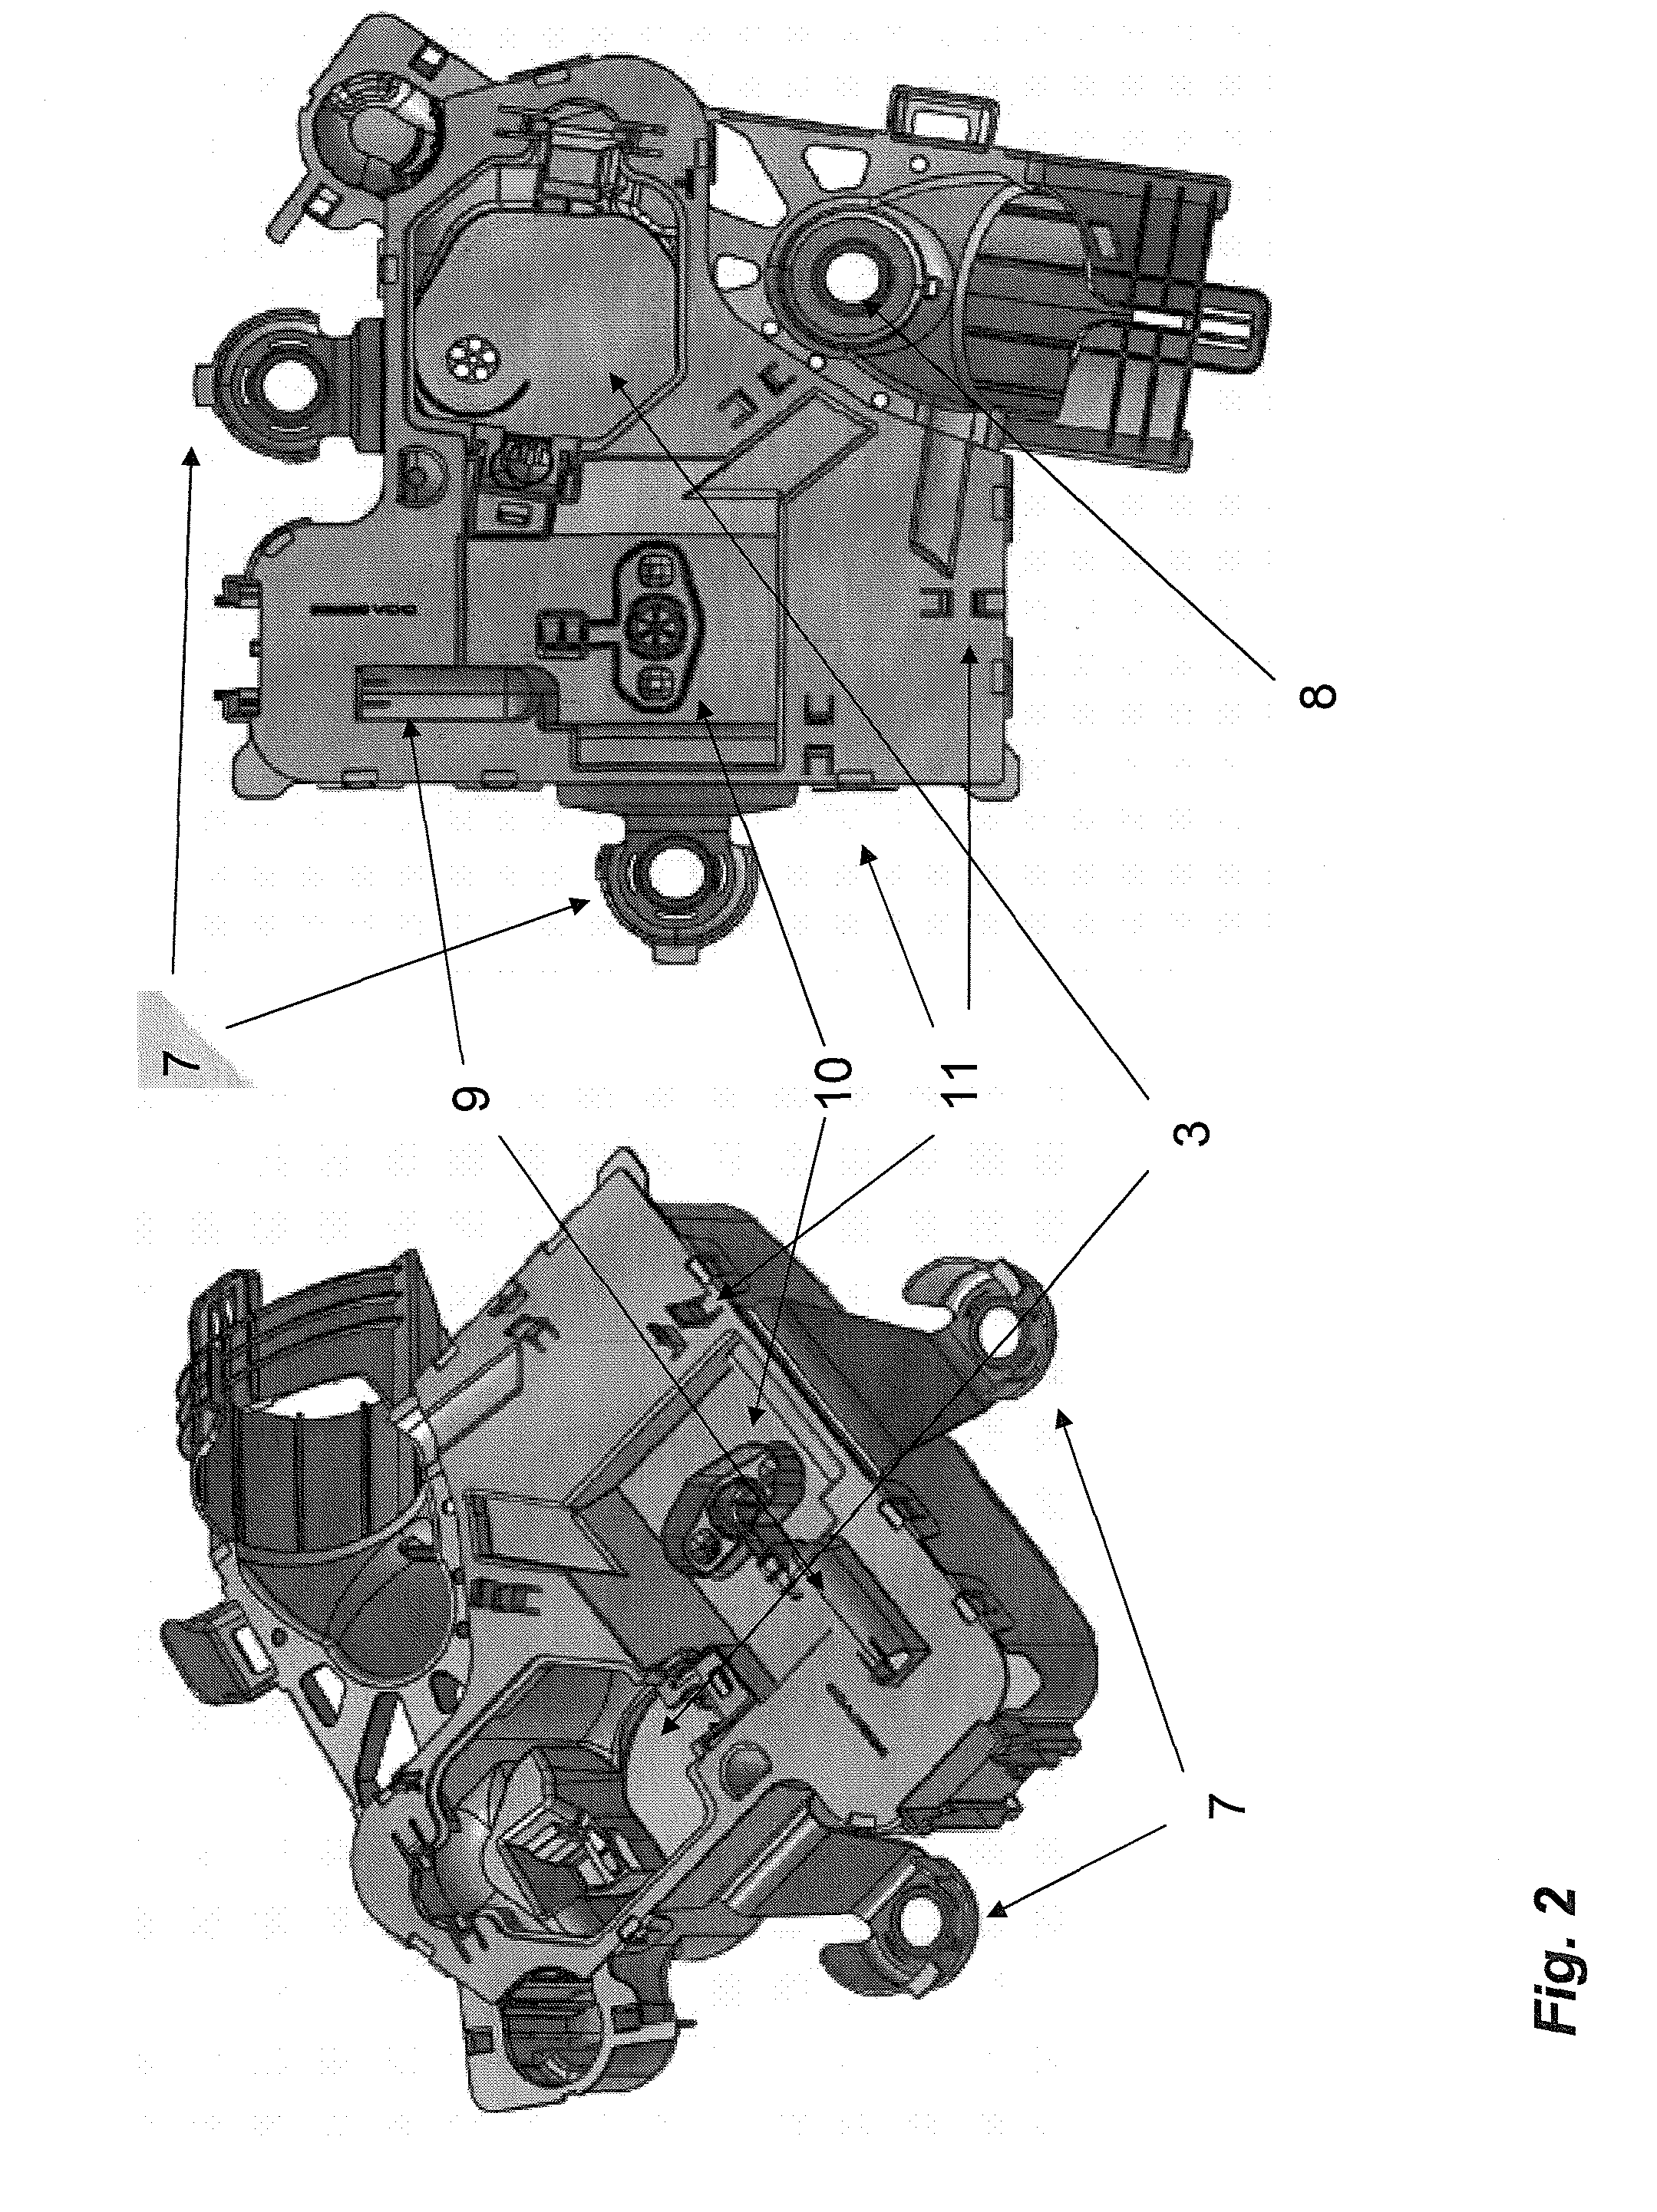 Process for manufacturing a plastic fuel tank equipped with a pump